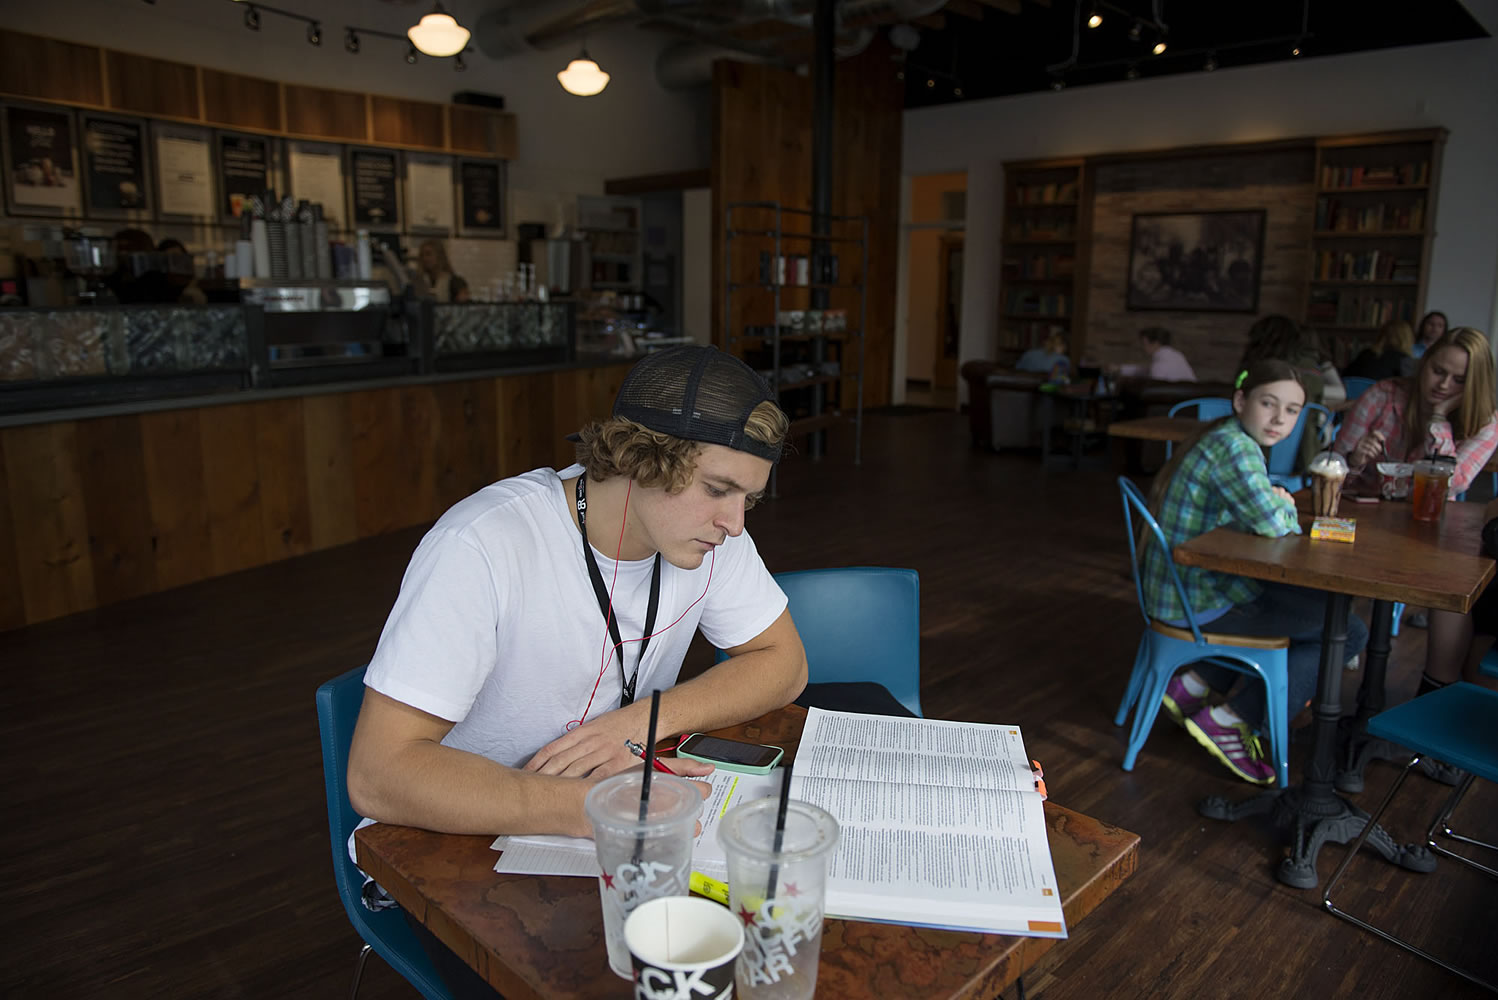 Igor Shapoval, a nursing student at Clark College, works on homework Friday afternoon at Black Rock Coffee in downtown Vancouver.